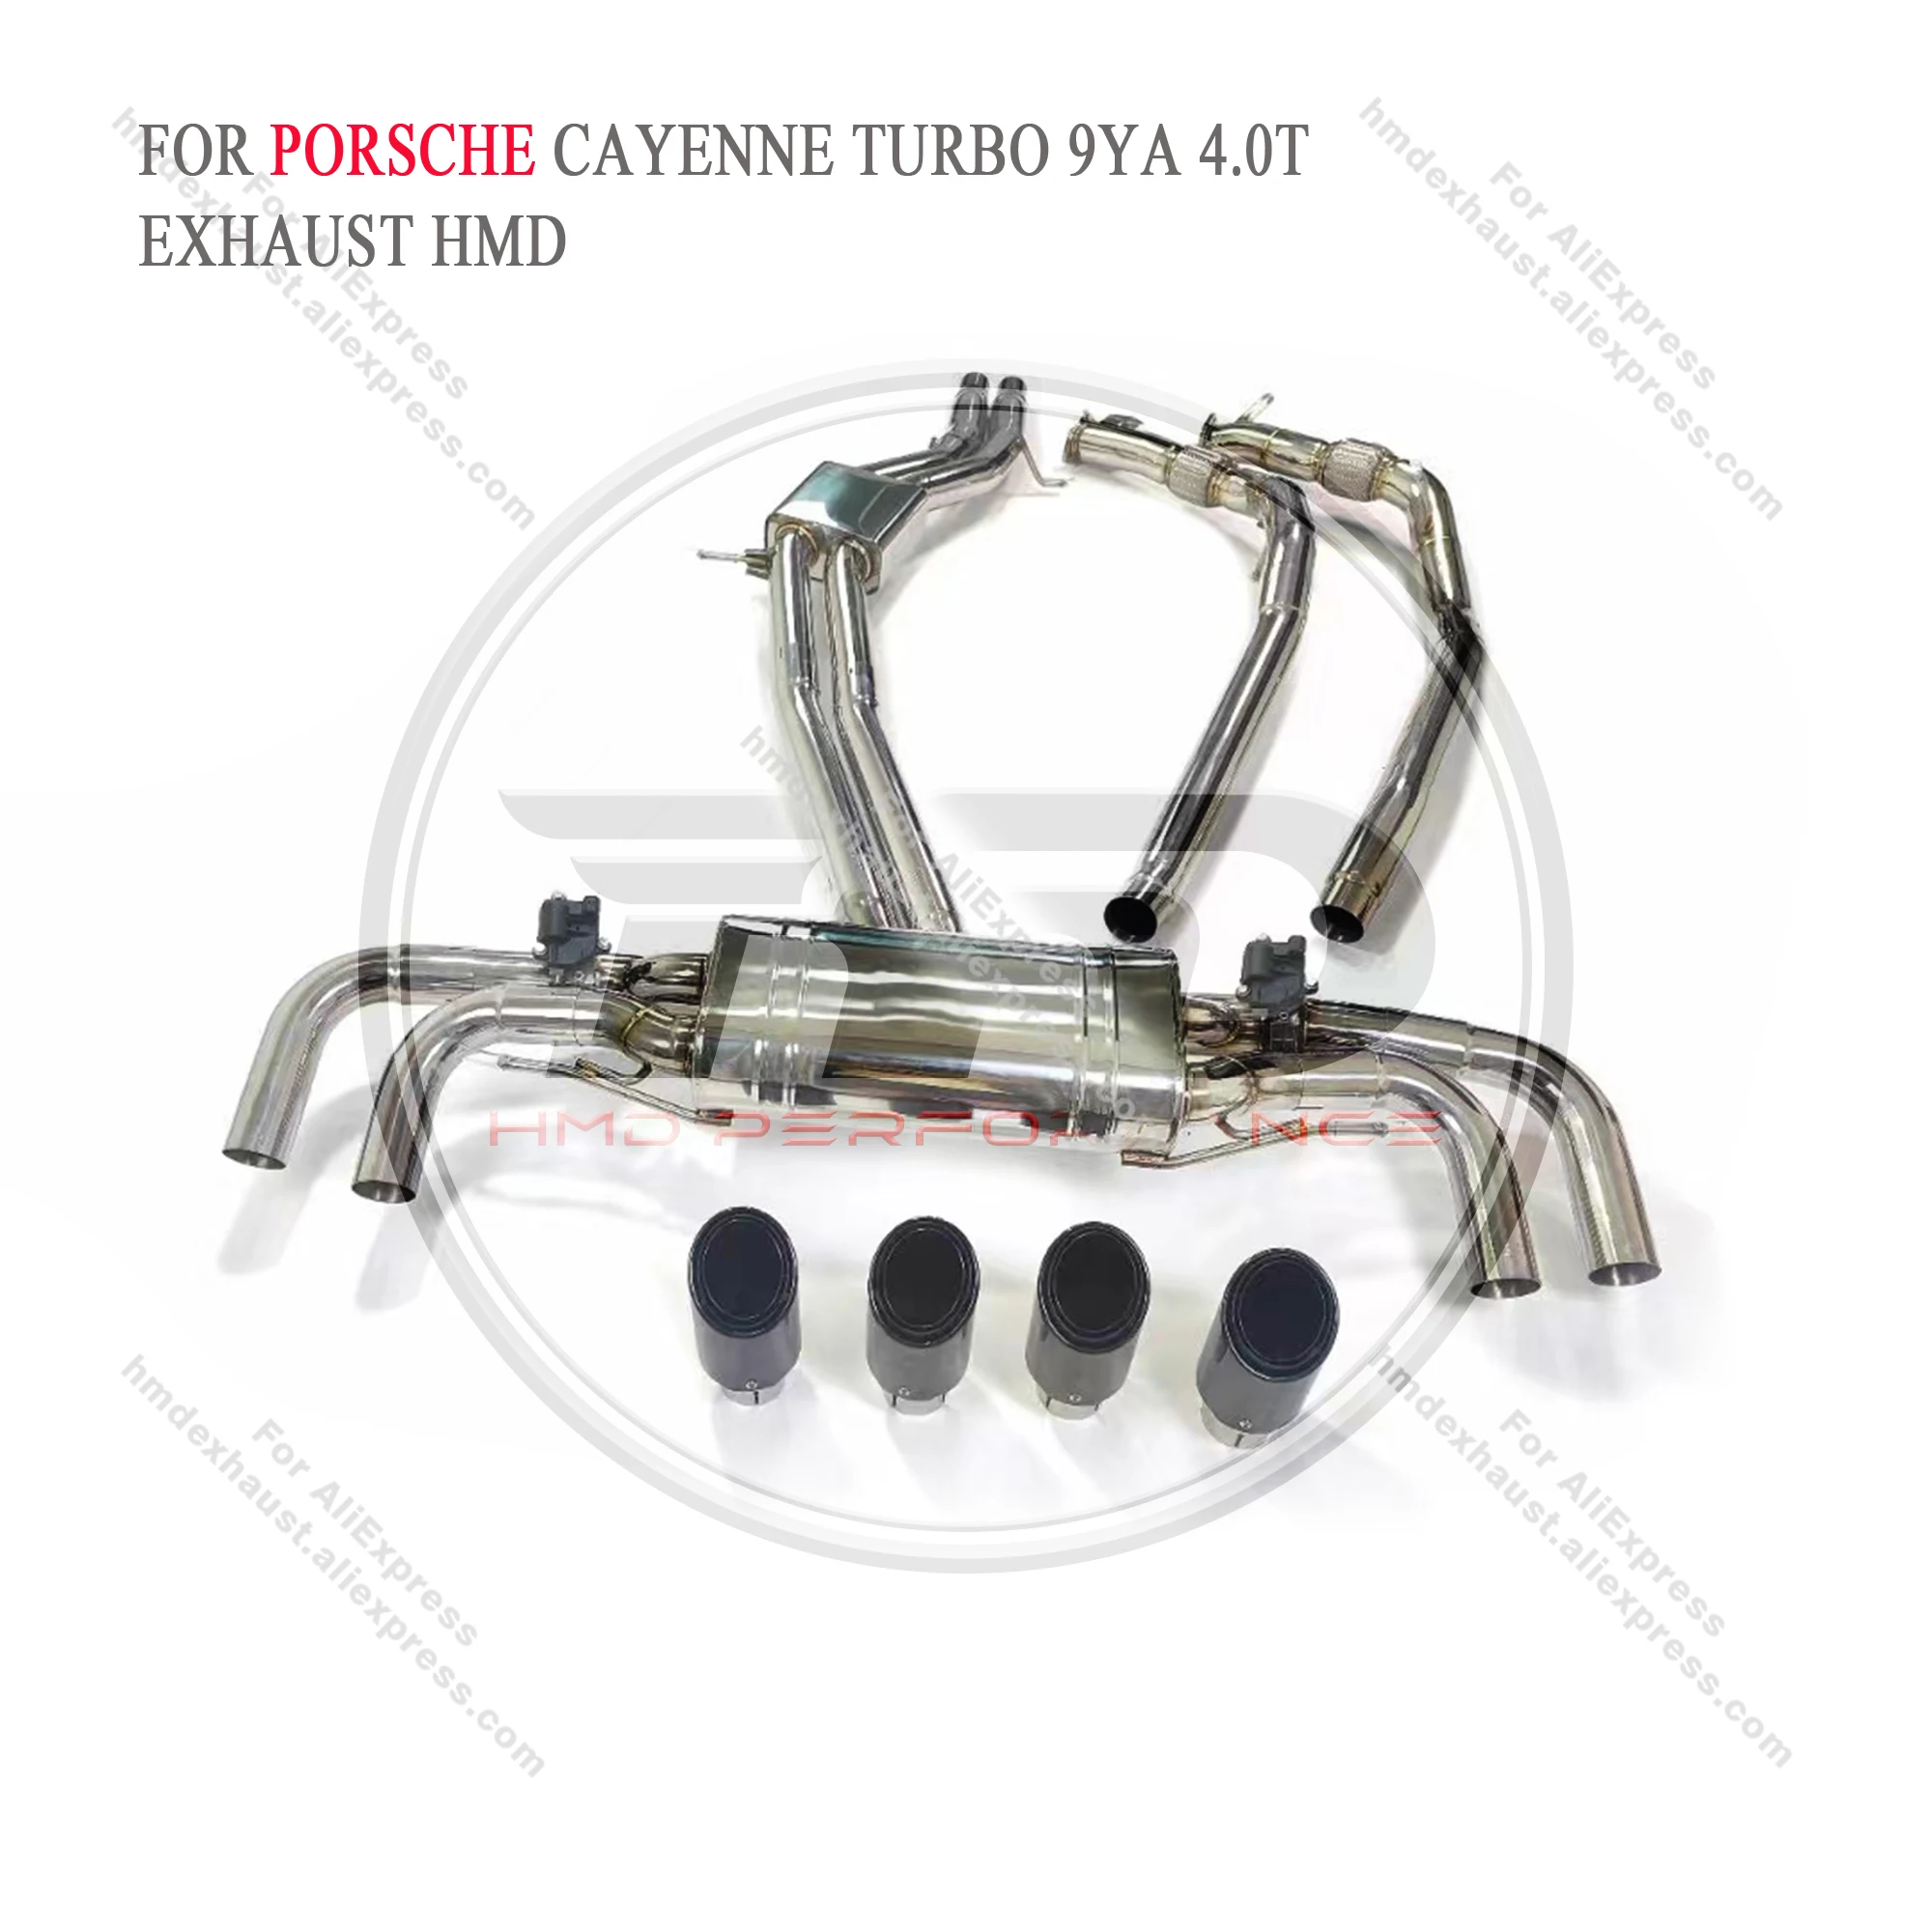 

HMD High Performance Stainless Steel Catback For Porsche Cayenne Turbo 9YA 4.0T With Muffler Valve Exhaust System Pipes